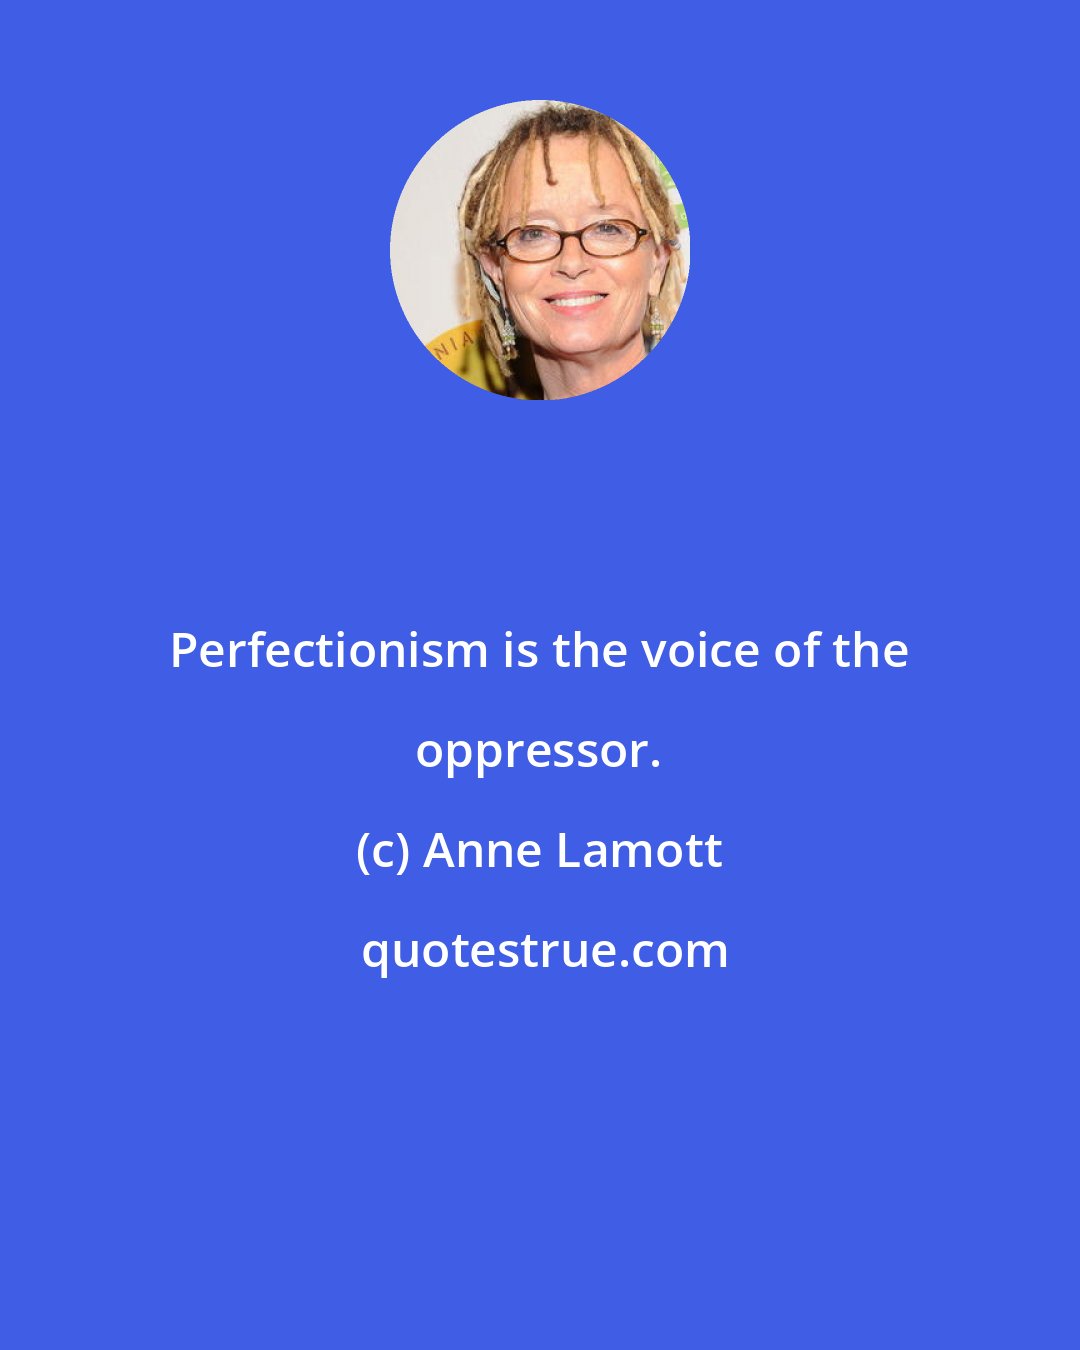 Anne Lamott: Perfectionism is the voice of the oppressor.